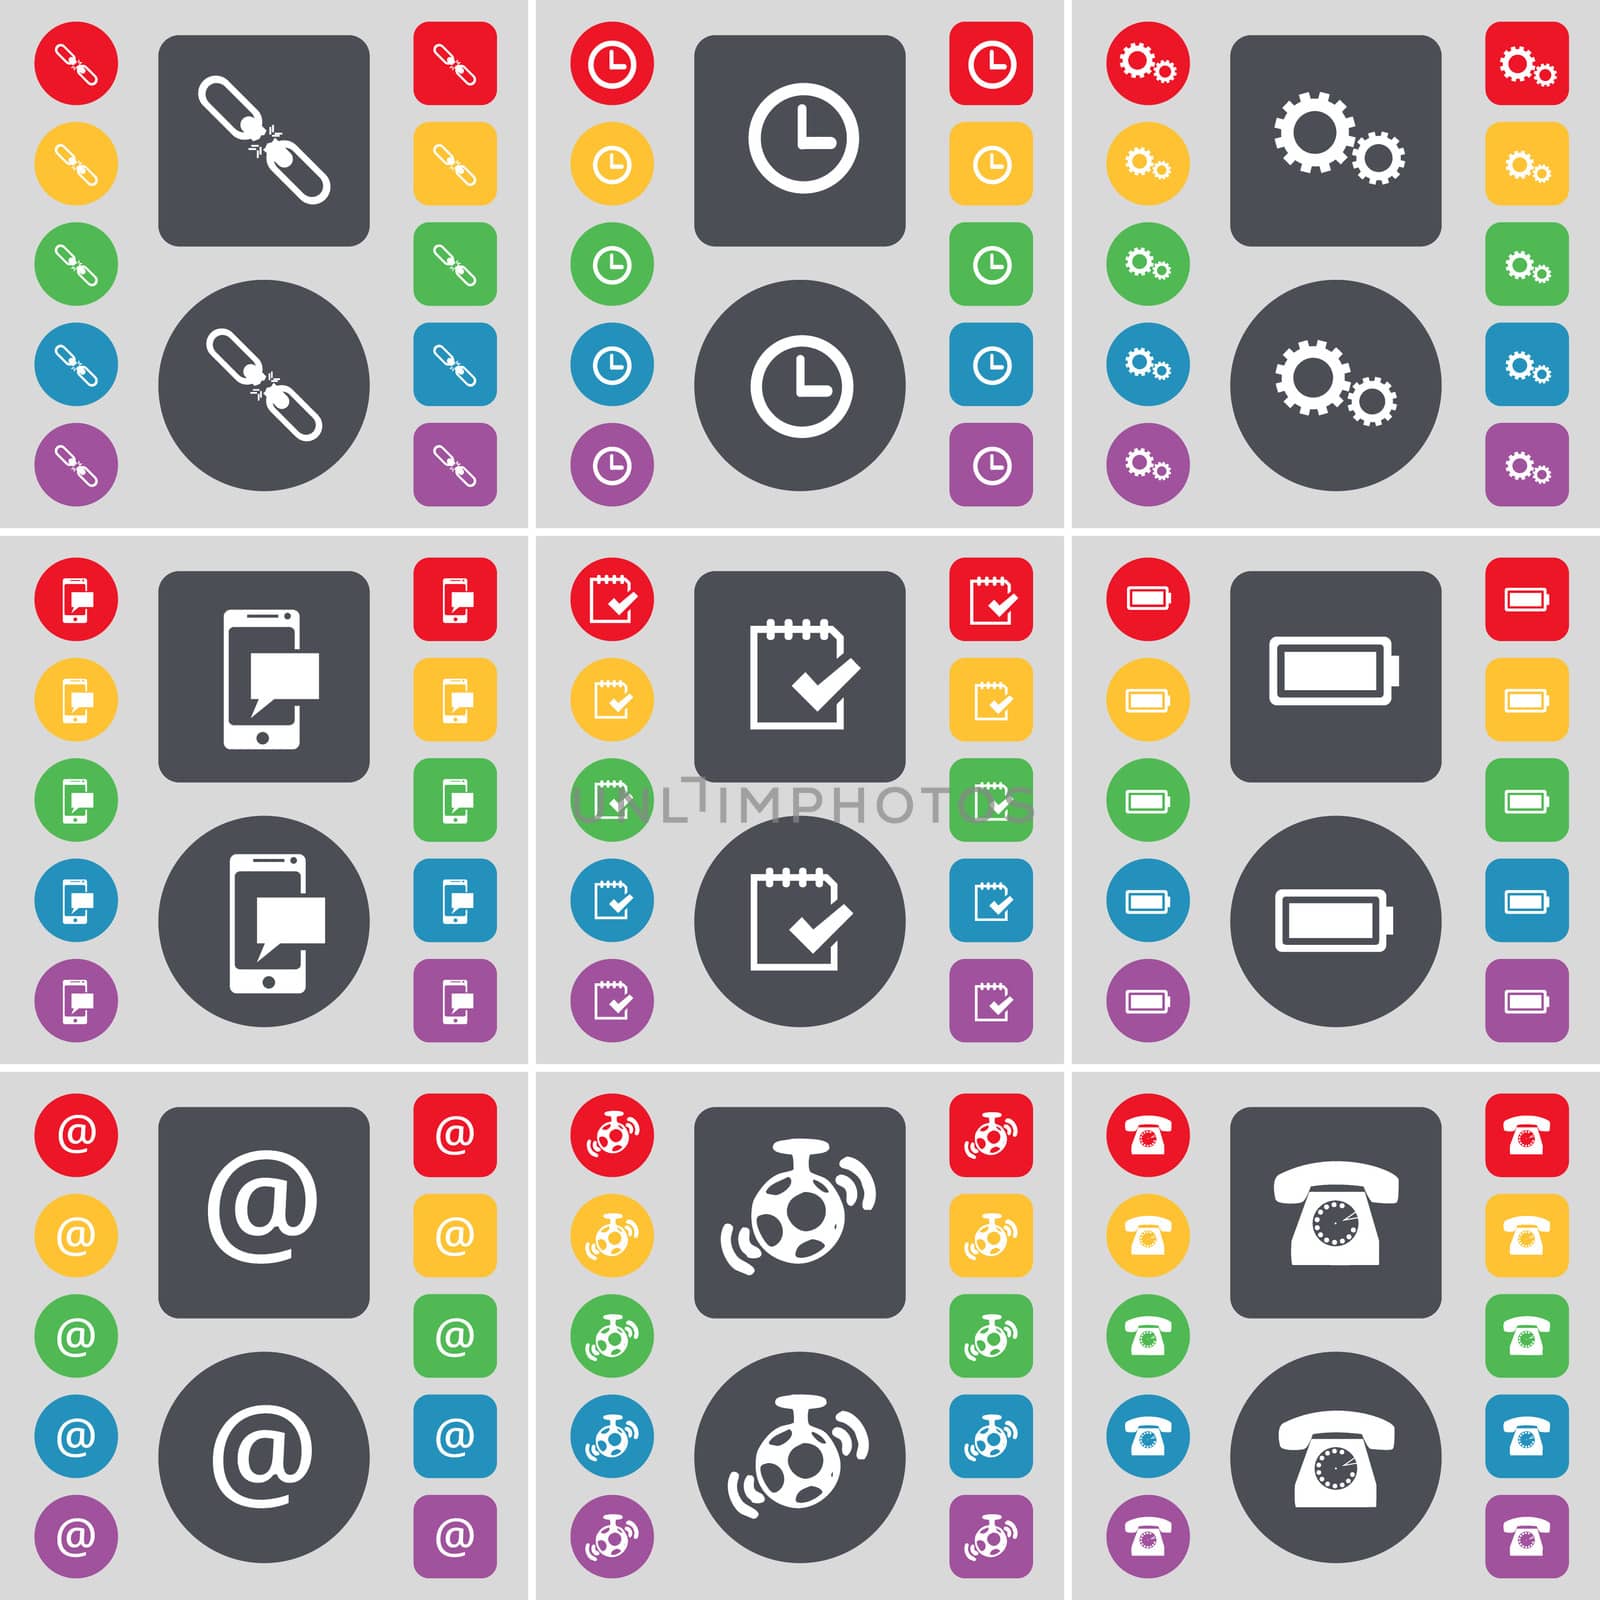 Link, Clock, Gear, SMS, Survey, Battery, Mail, Speaker, Retro phone icon symbol. A large set of flat, colored buttons for your design. illustration